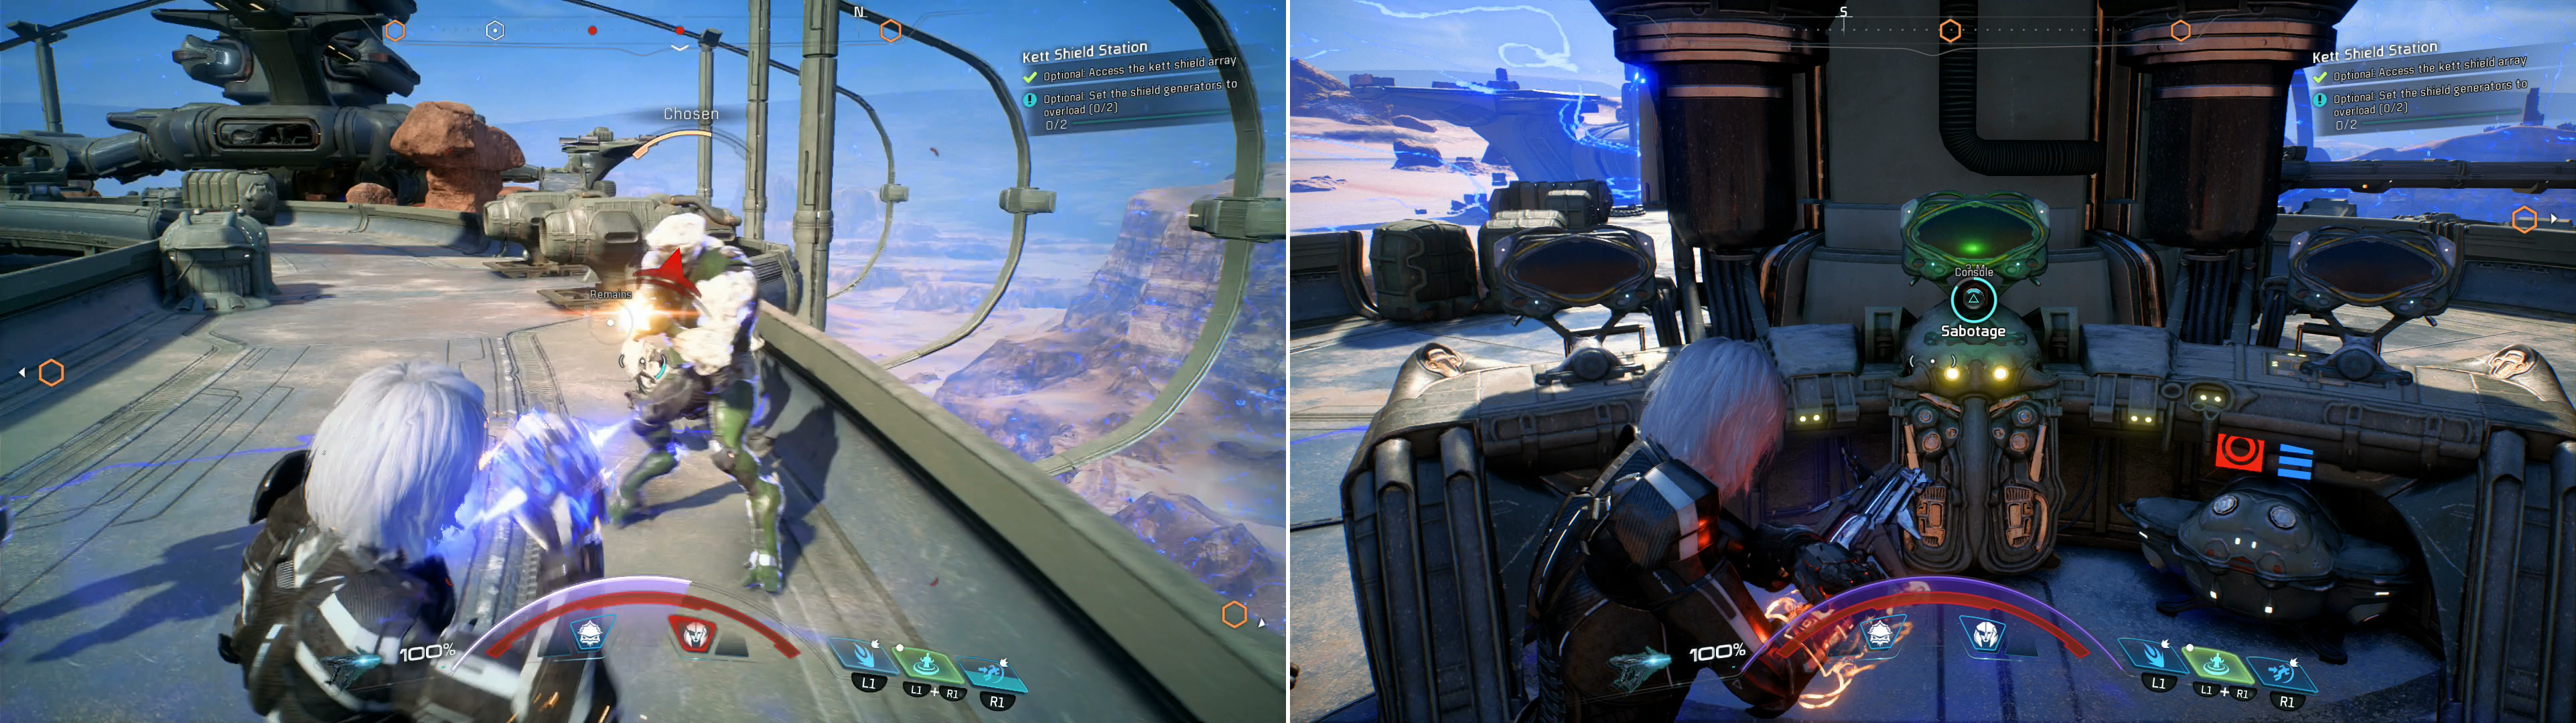 Thwart the Kett that arrive via dropship (left) and sabotage the shield generators (right) to take down the barrier around the base.